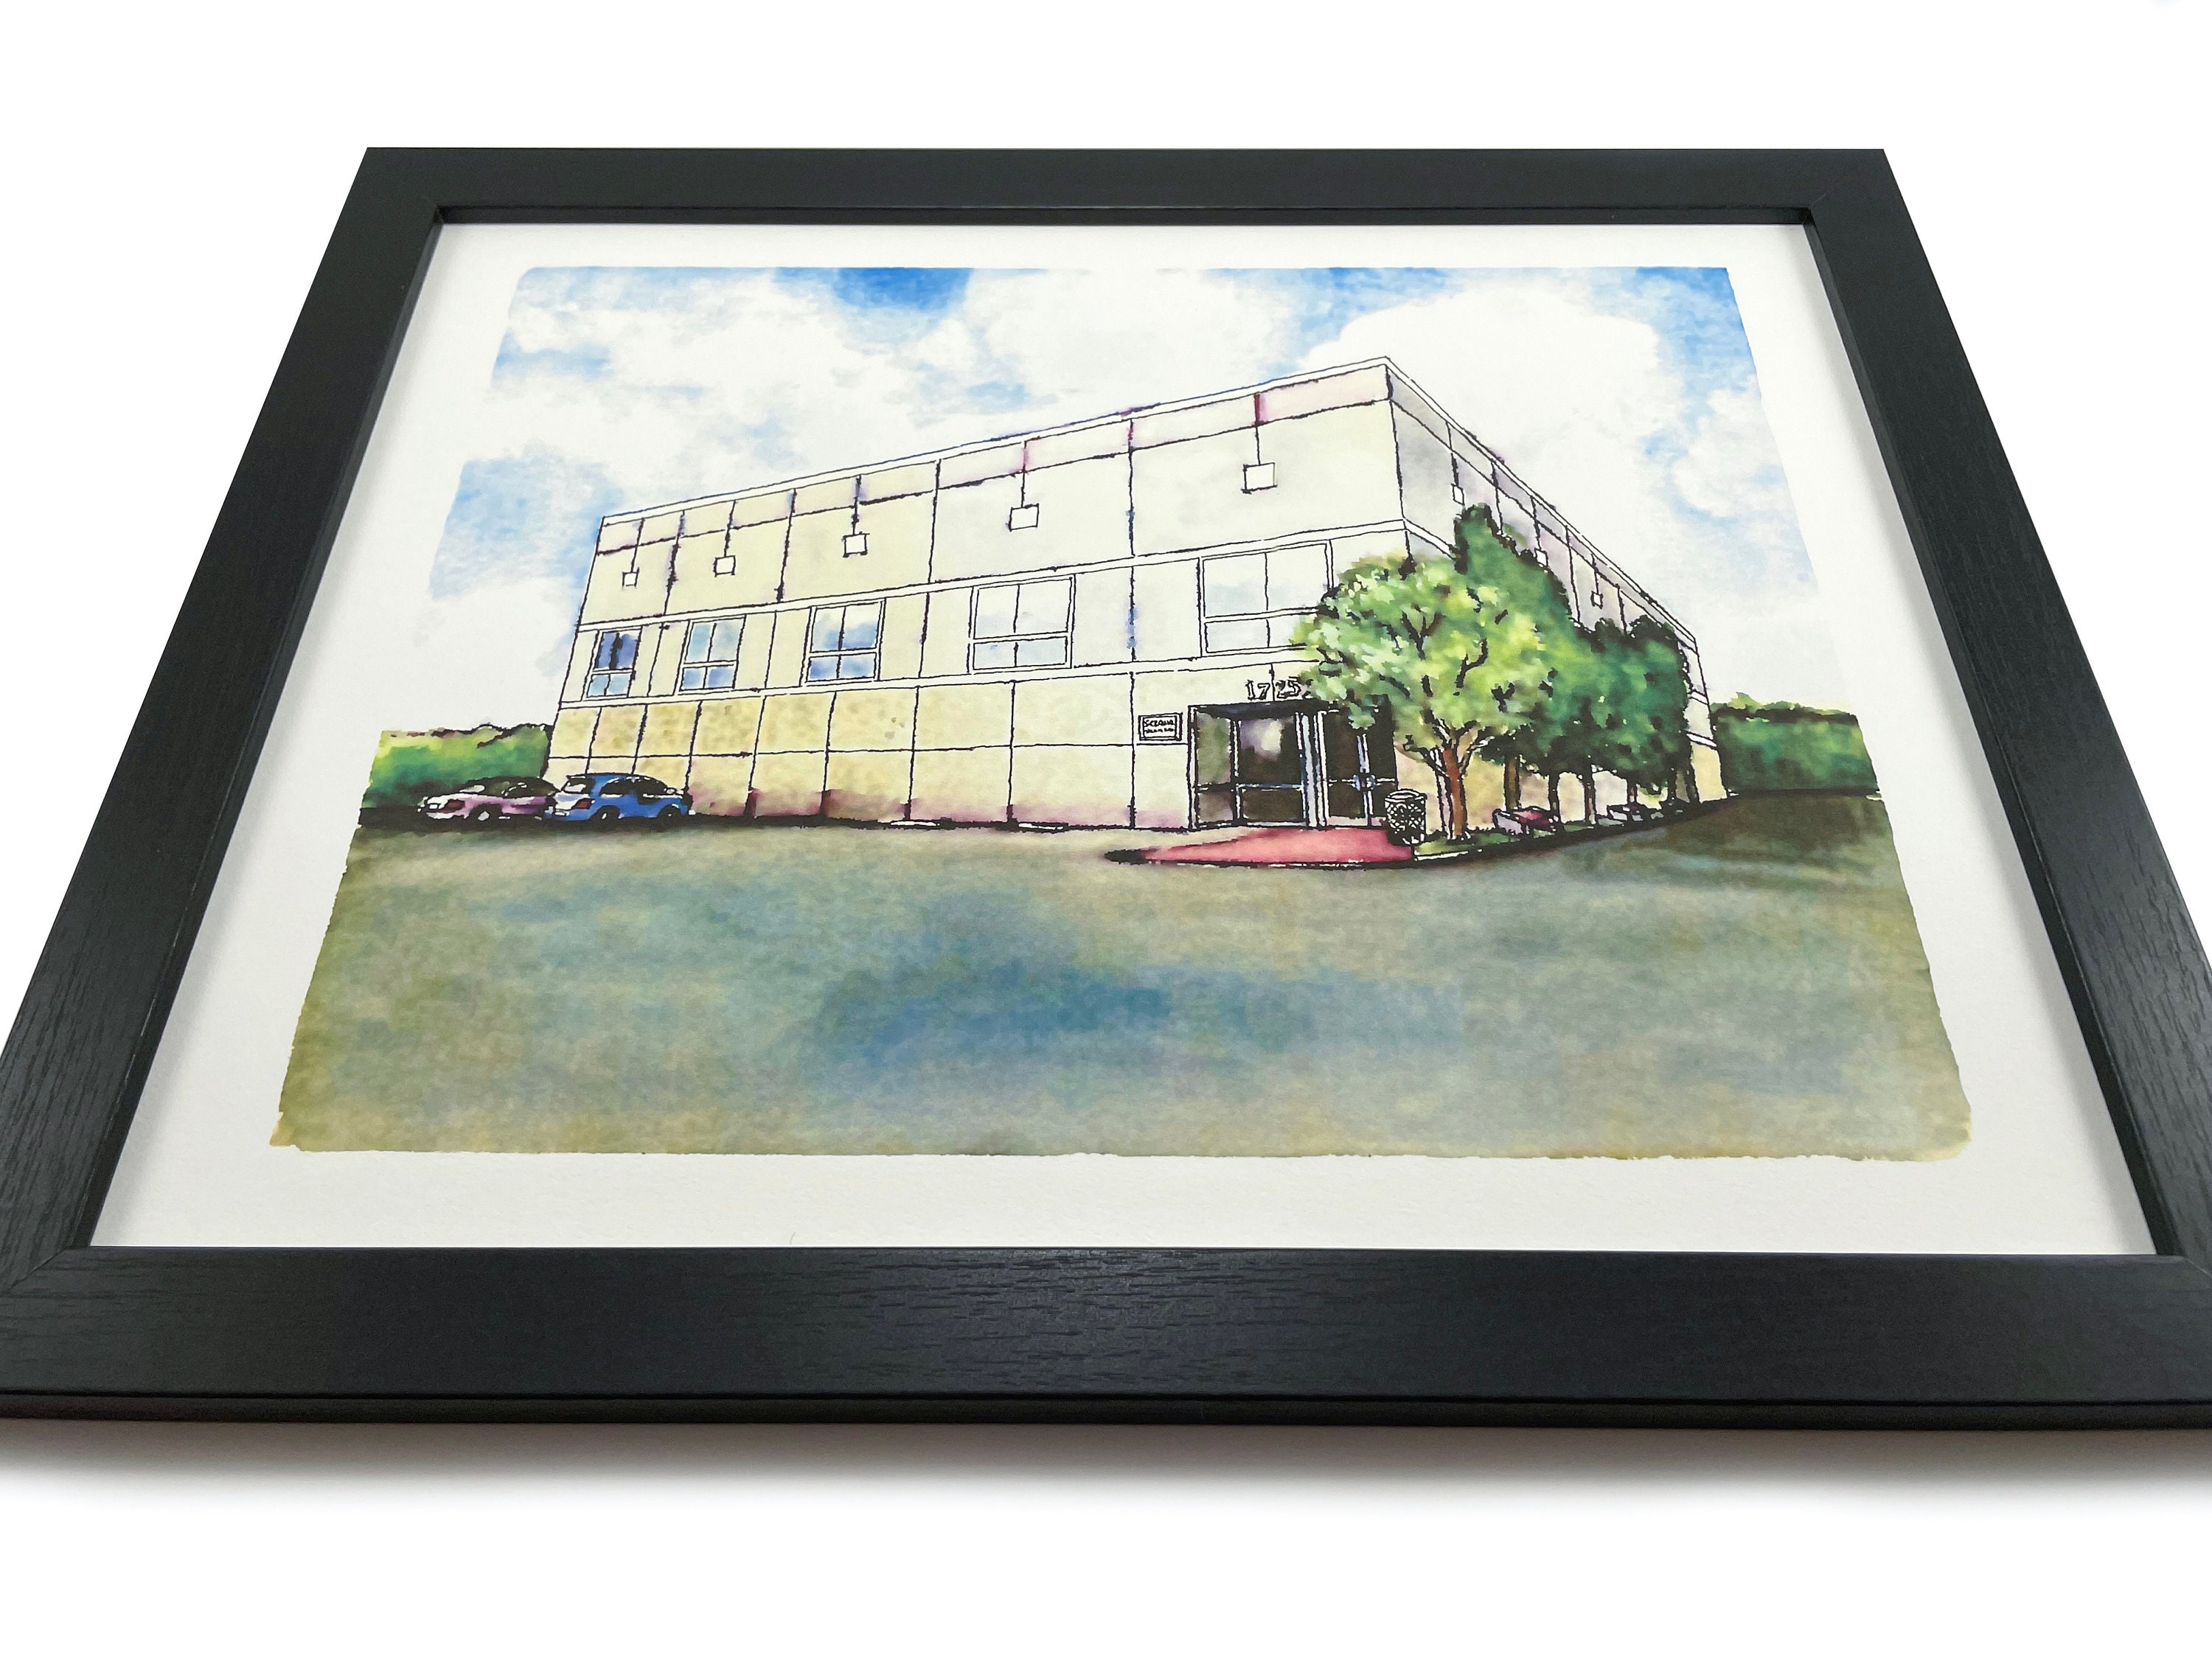 My Party Shirt Pam Beesly The Office Building Watercolor Painting Poster  Dunder Mifflin 11 x 17